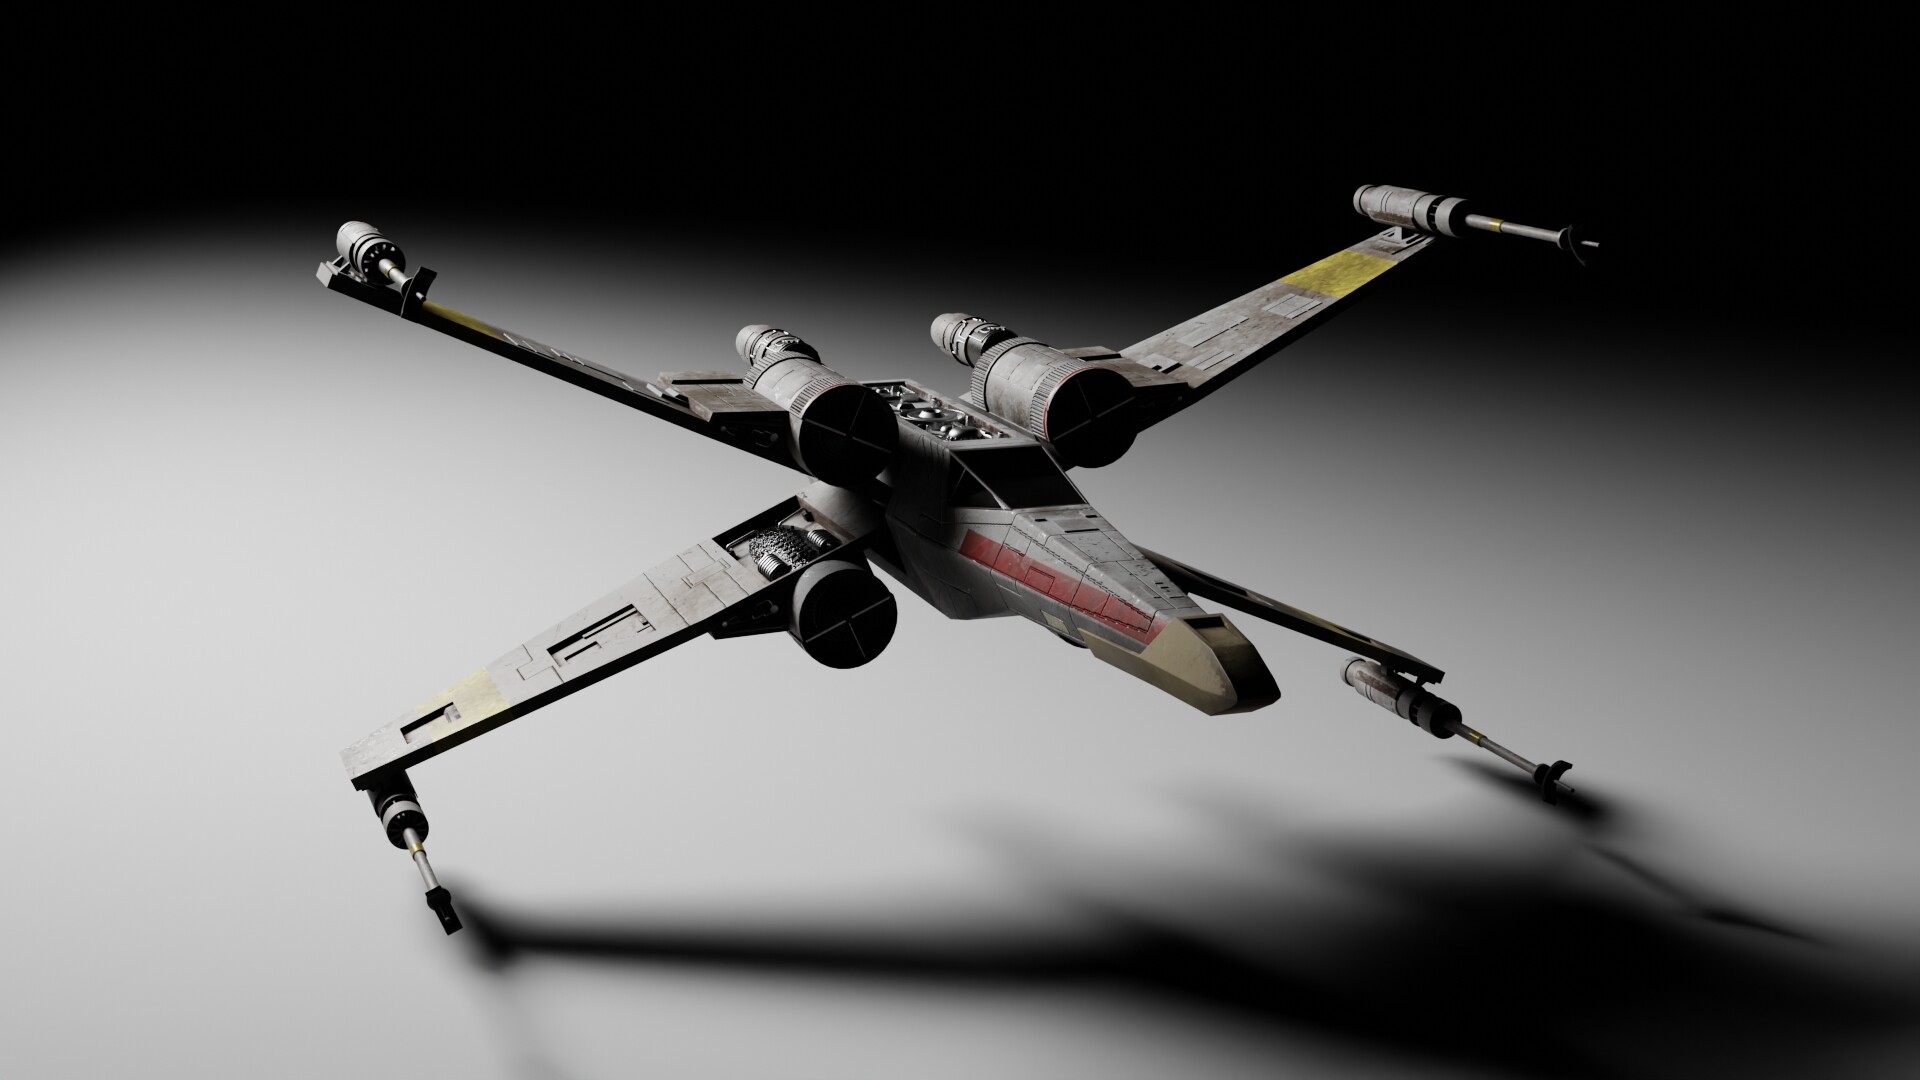 X Wing fighter: Bạn đã bao giờ muốn bay trên chiếc phi cơ X Wing fighter từ Hành tinh Thiên Hà đến trái đất chưa? Hãy xem những hình ảnh mới nhất của X Wing fighter và trải nghiệm cảm giác bay lượn trên không trung như thật ngay tại đây. Translation: Have you ever wanted to fly on the X Wing fighter from the Galaxy to Earth? Check out the latest images of X Wing fighter and experience the feeling of flying in the air here. (Note: The first part of the Vietnamese paragraph may be a reference to Star Wars films where the X Wing fighter spacecrafts are featured. The second part indicates that the user can see realistic images of X Wing fighter spacecrafts)